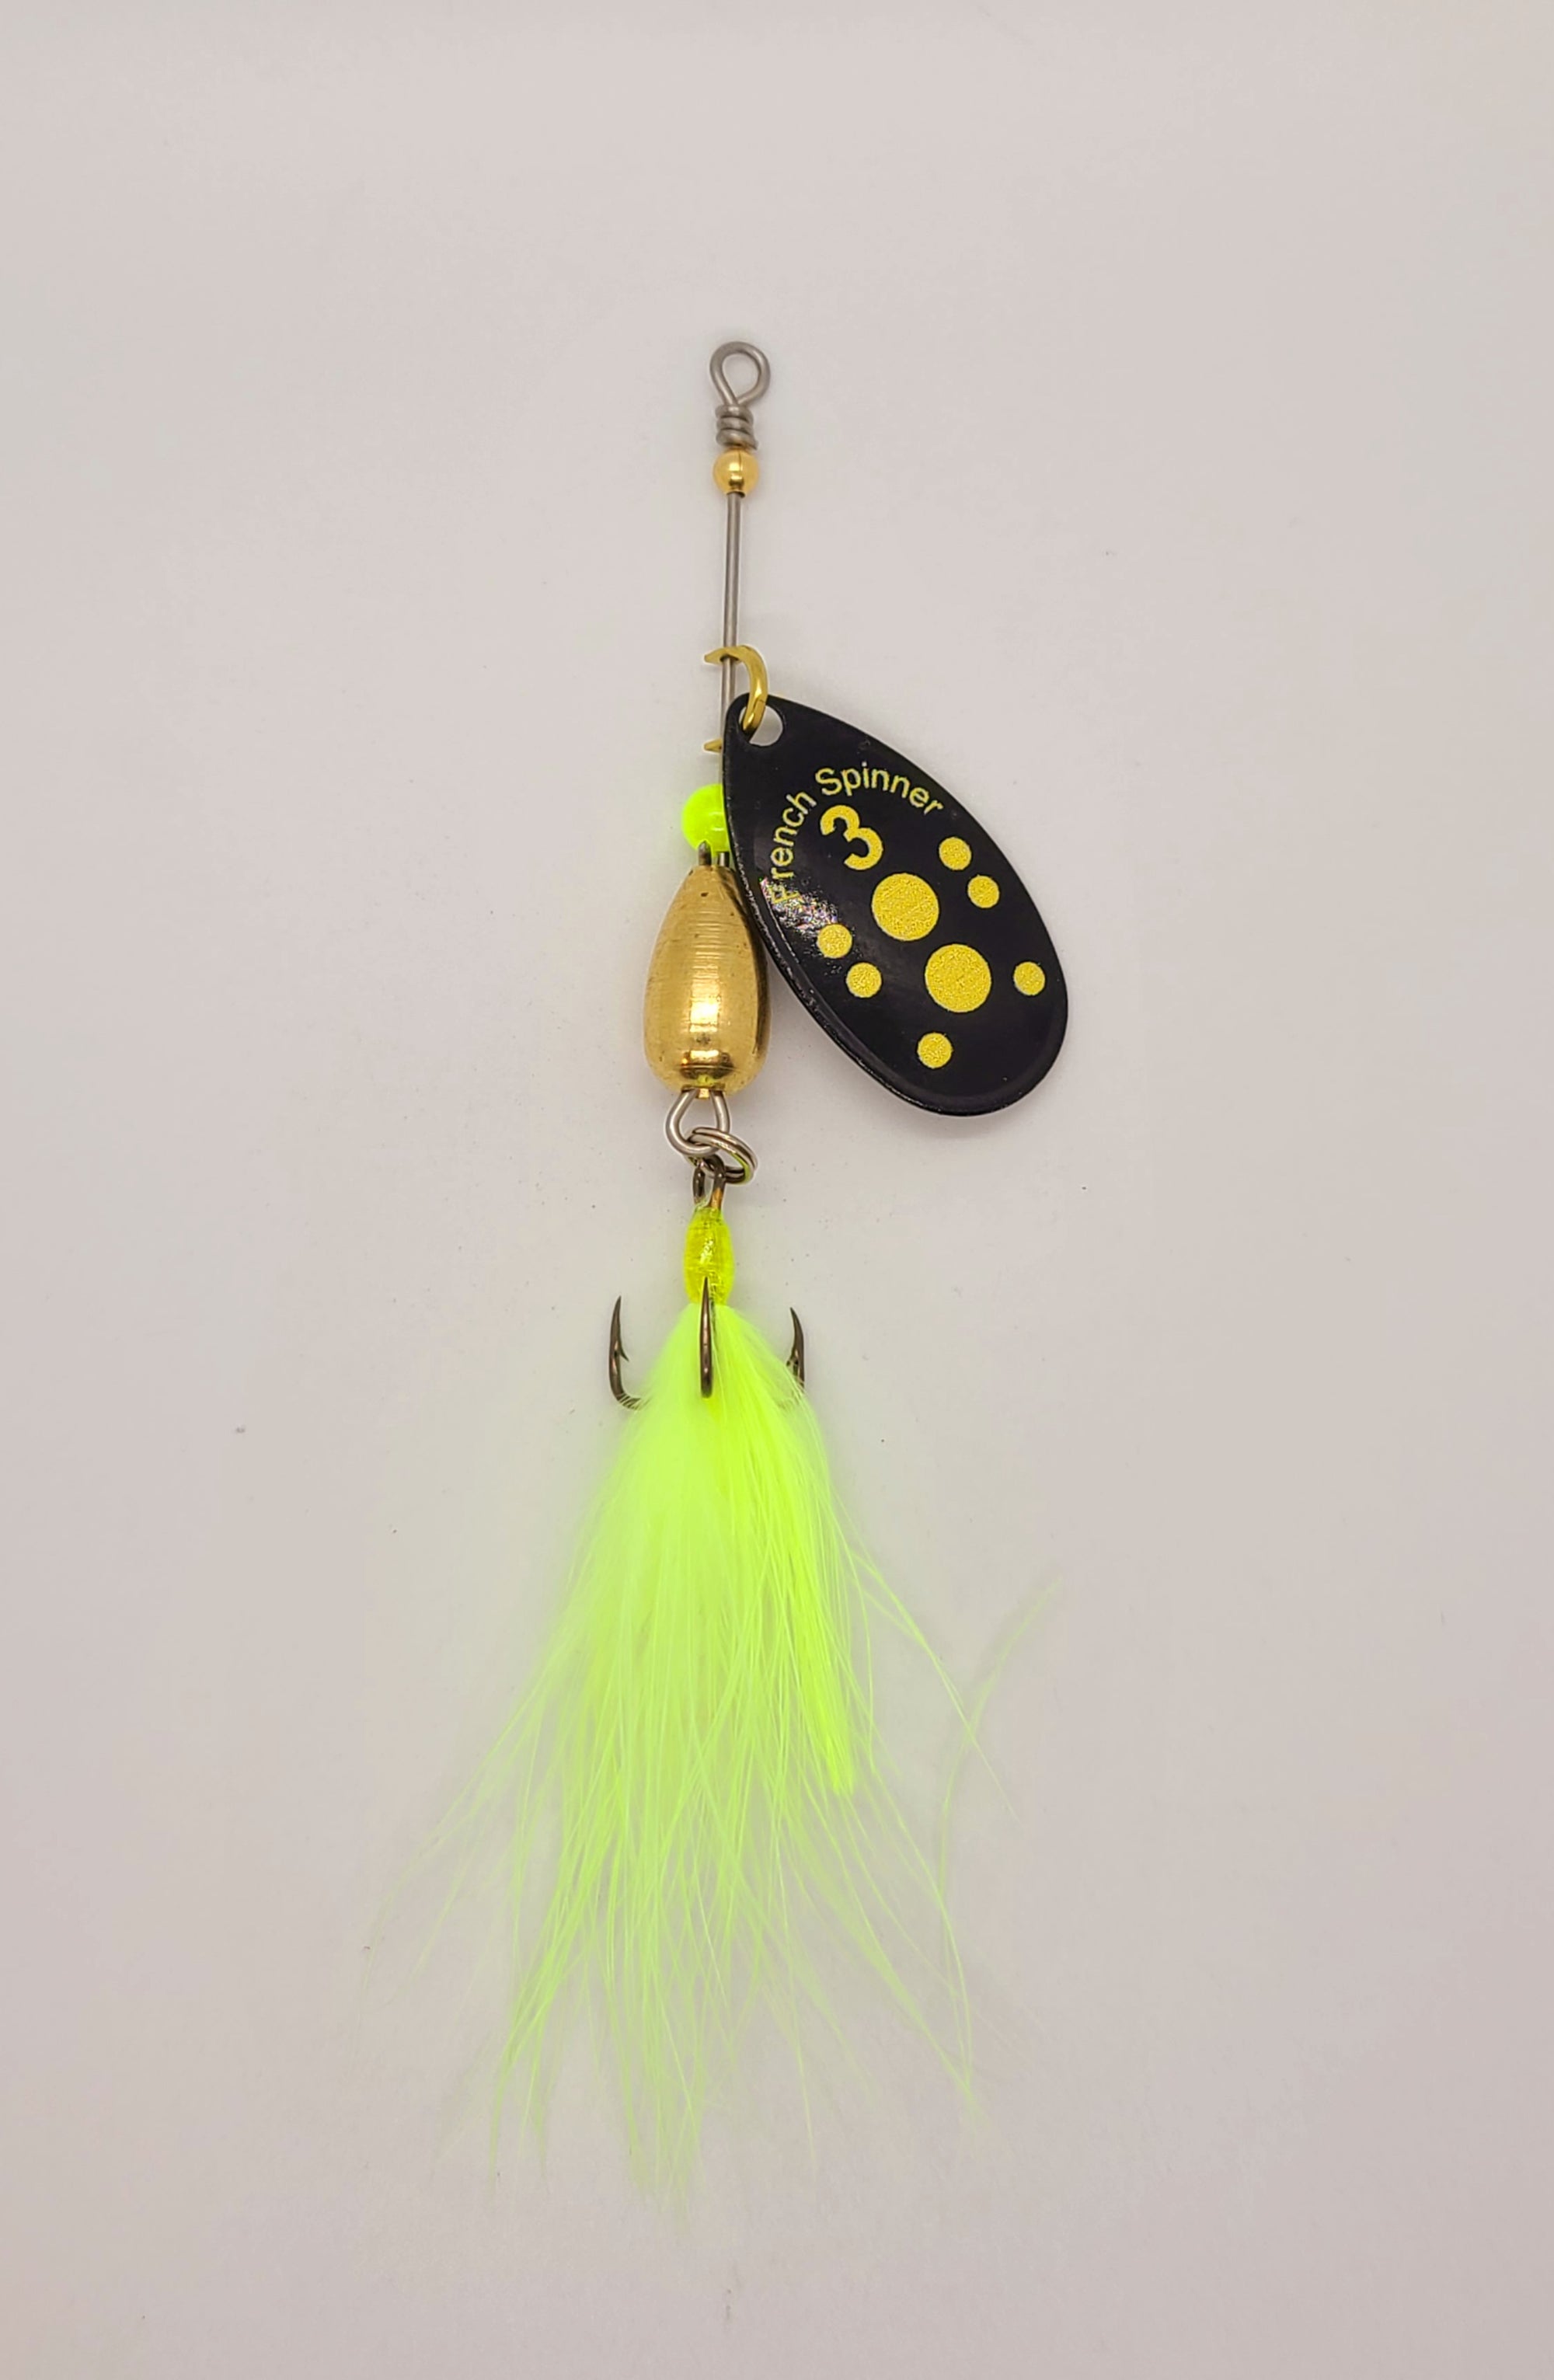 FRENCH BLADE DRESSED SPINNERS - LEAD FREE - Get'n Hook'd Lures